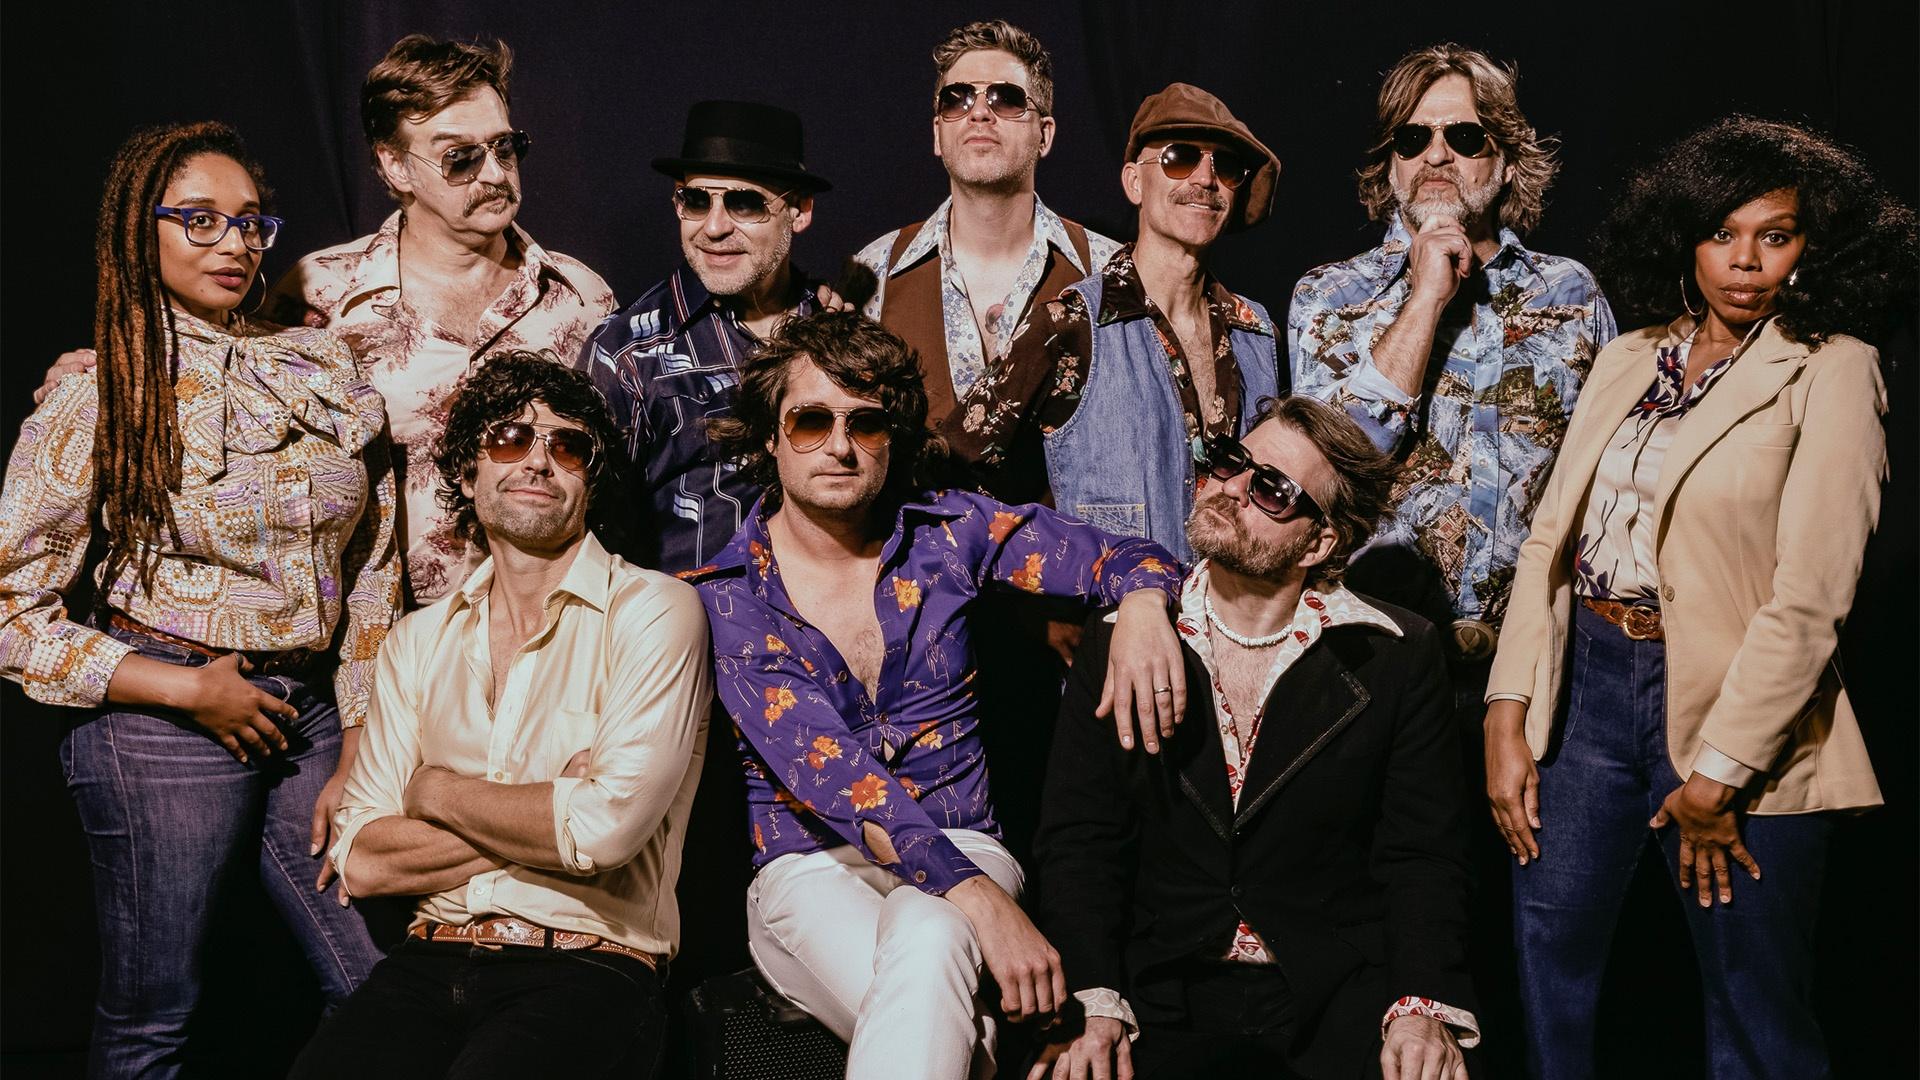 YACHT ROCK REVUE: 70s AND 80s, LIVE FROM NEW YORK